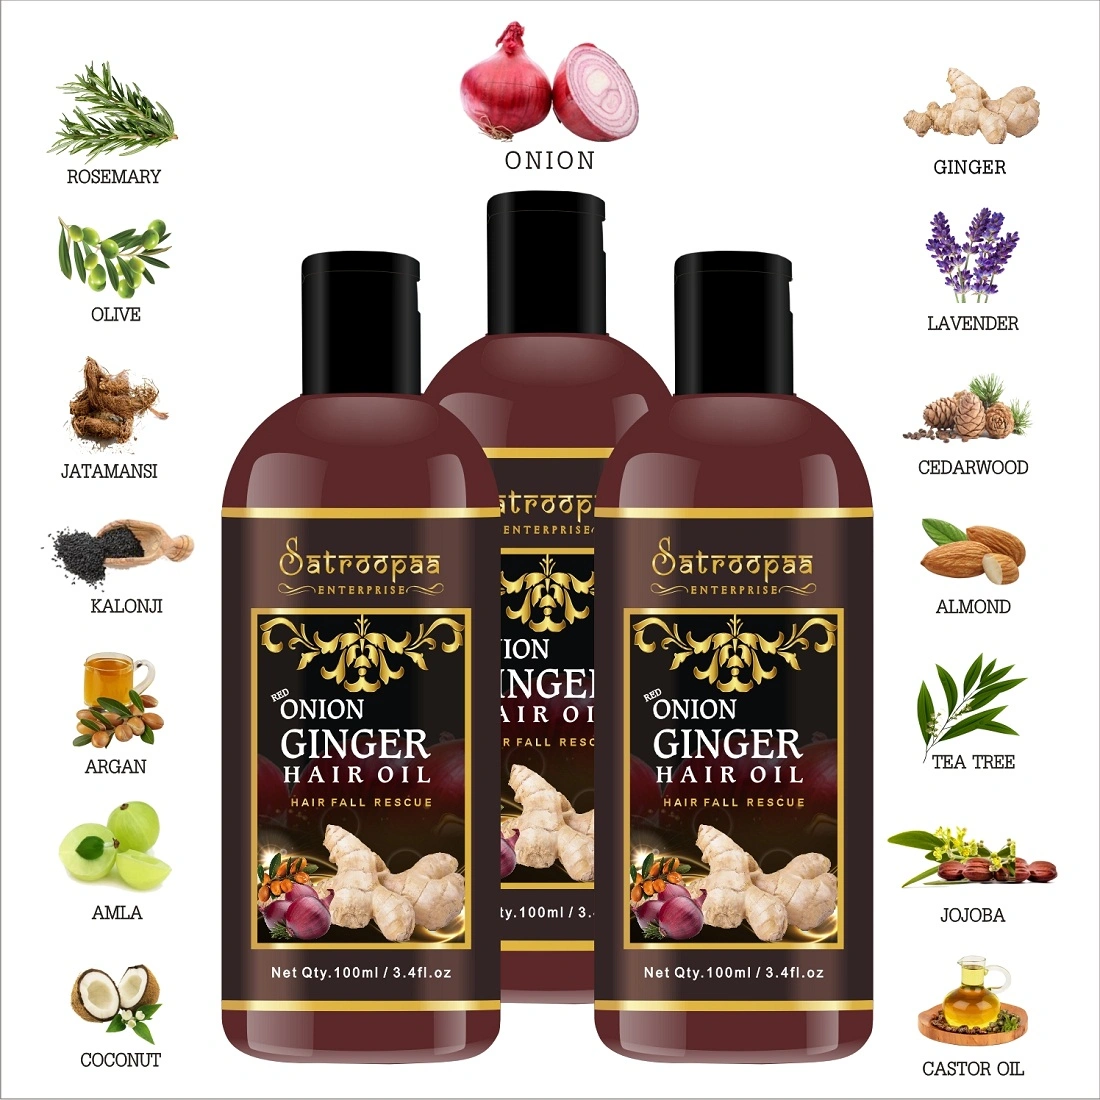 satroopaa Onion Ginger Hair Oil For Beautiful &amp; Stronger Hair with 14 natural oils 50 ml Hair Oil  (50 ml)-10529038